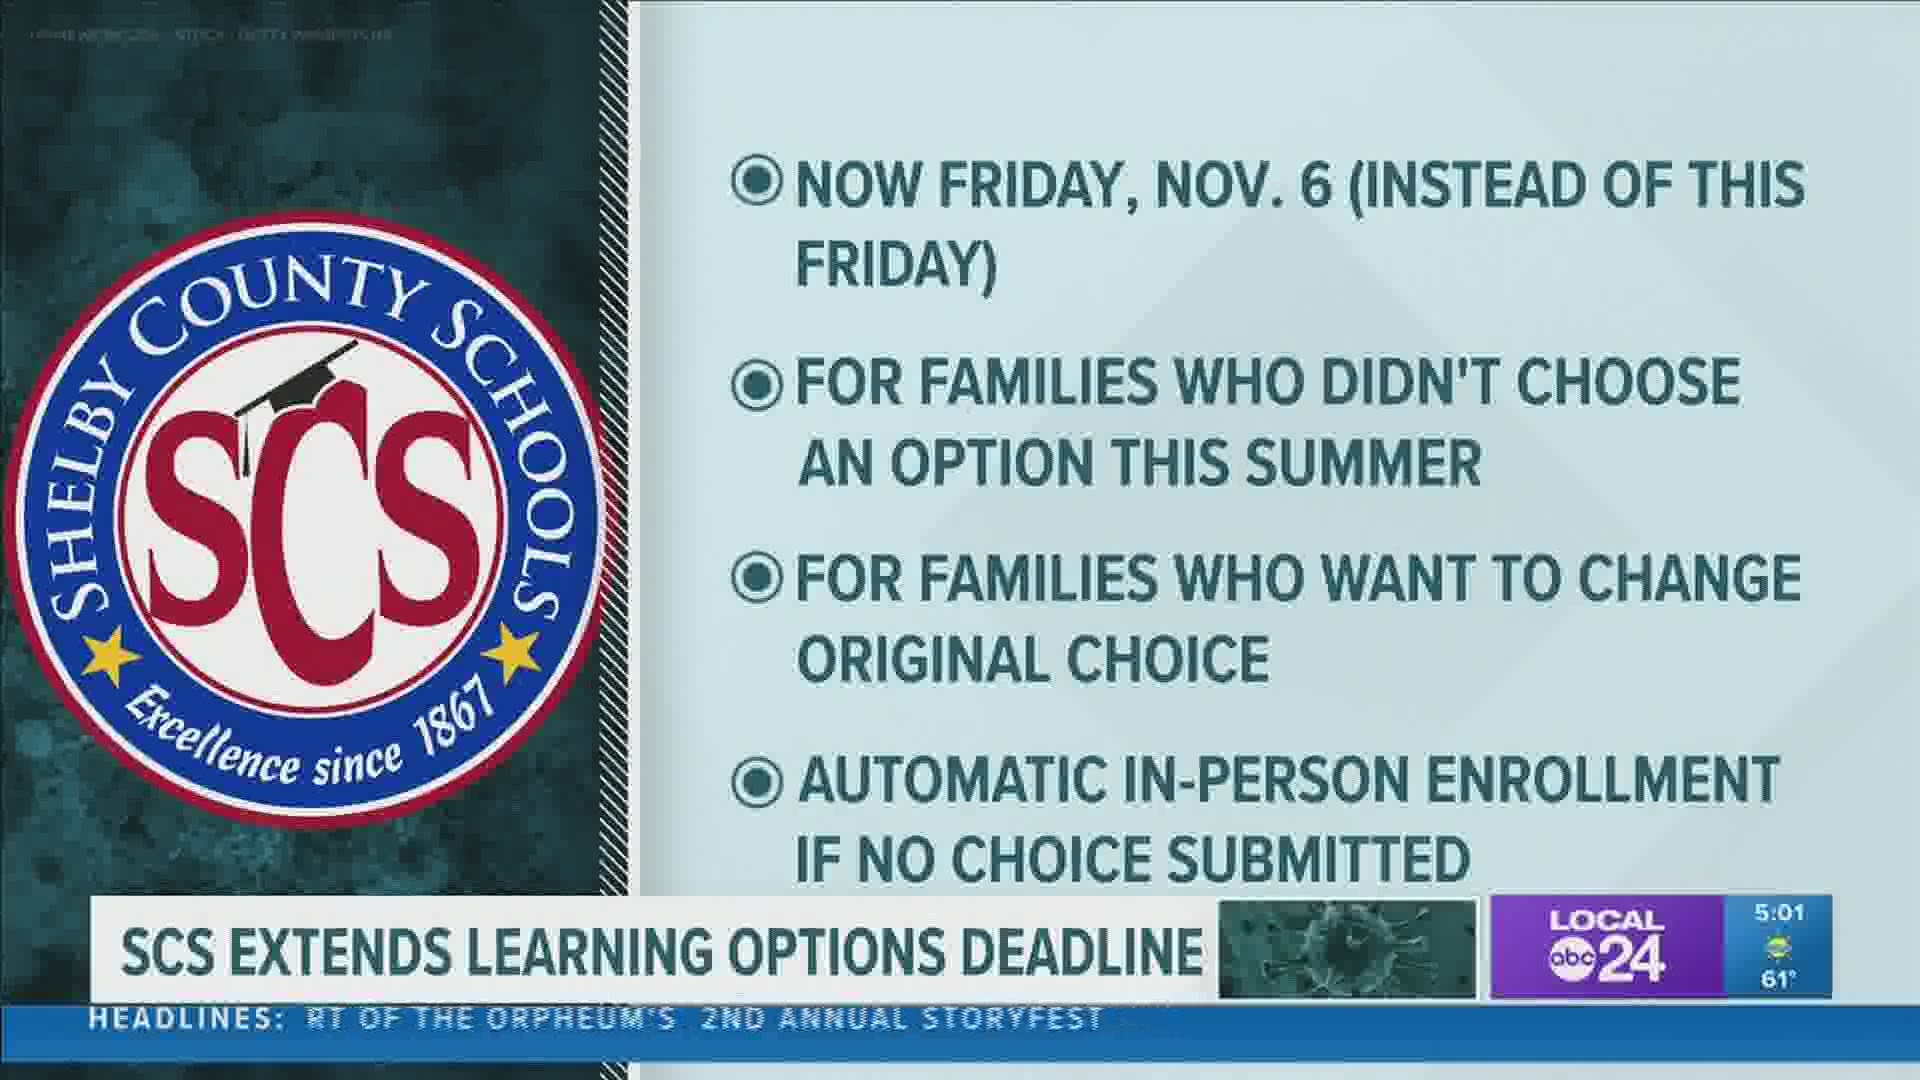 November 6th is now the deadline for parents to decide on in-person or virtual learning for the spring.